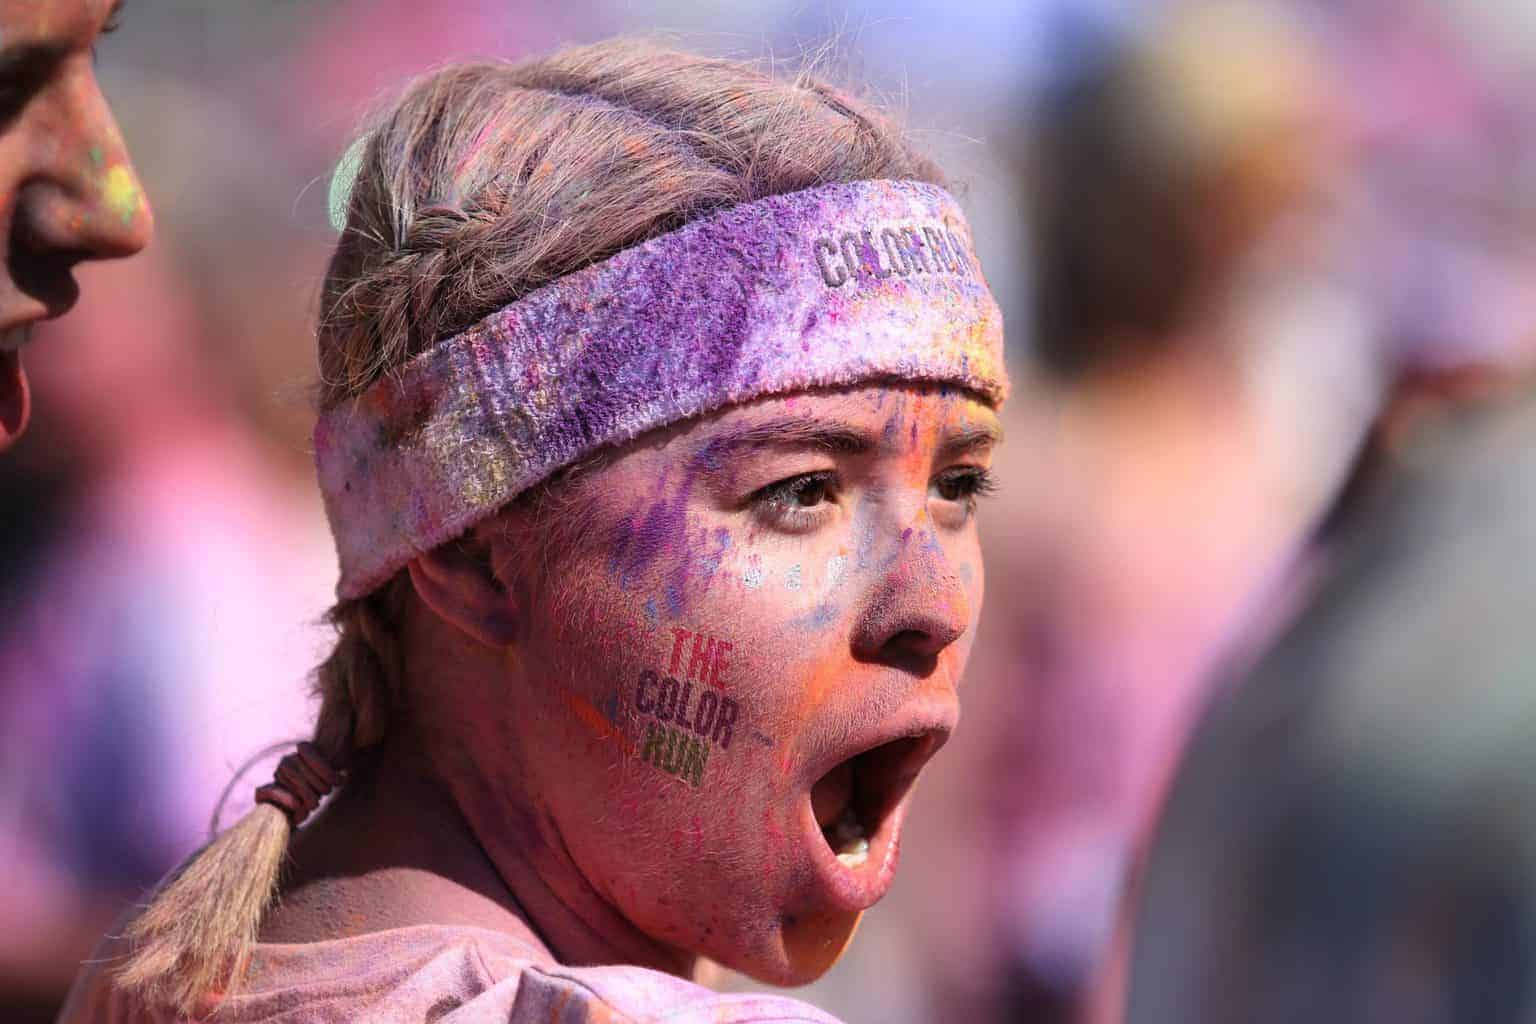 A young girl filled with face paint yelling out of excitemen